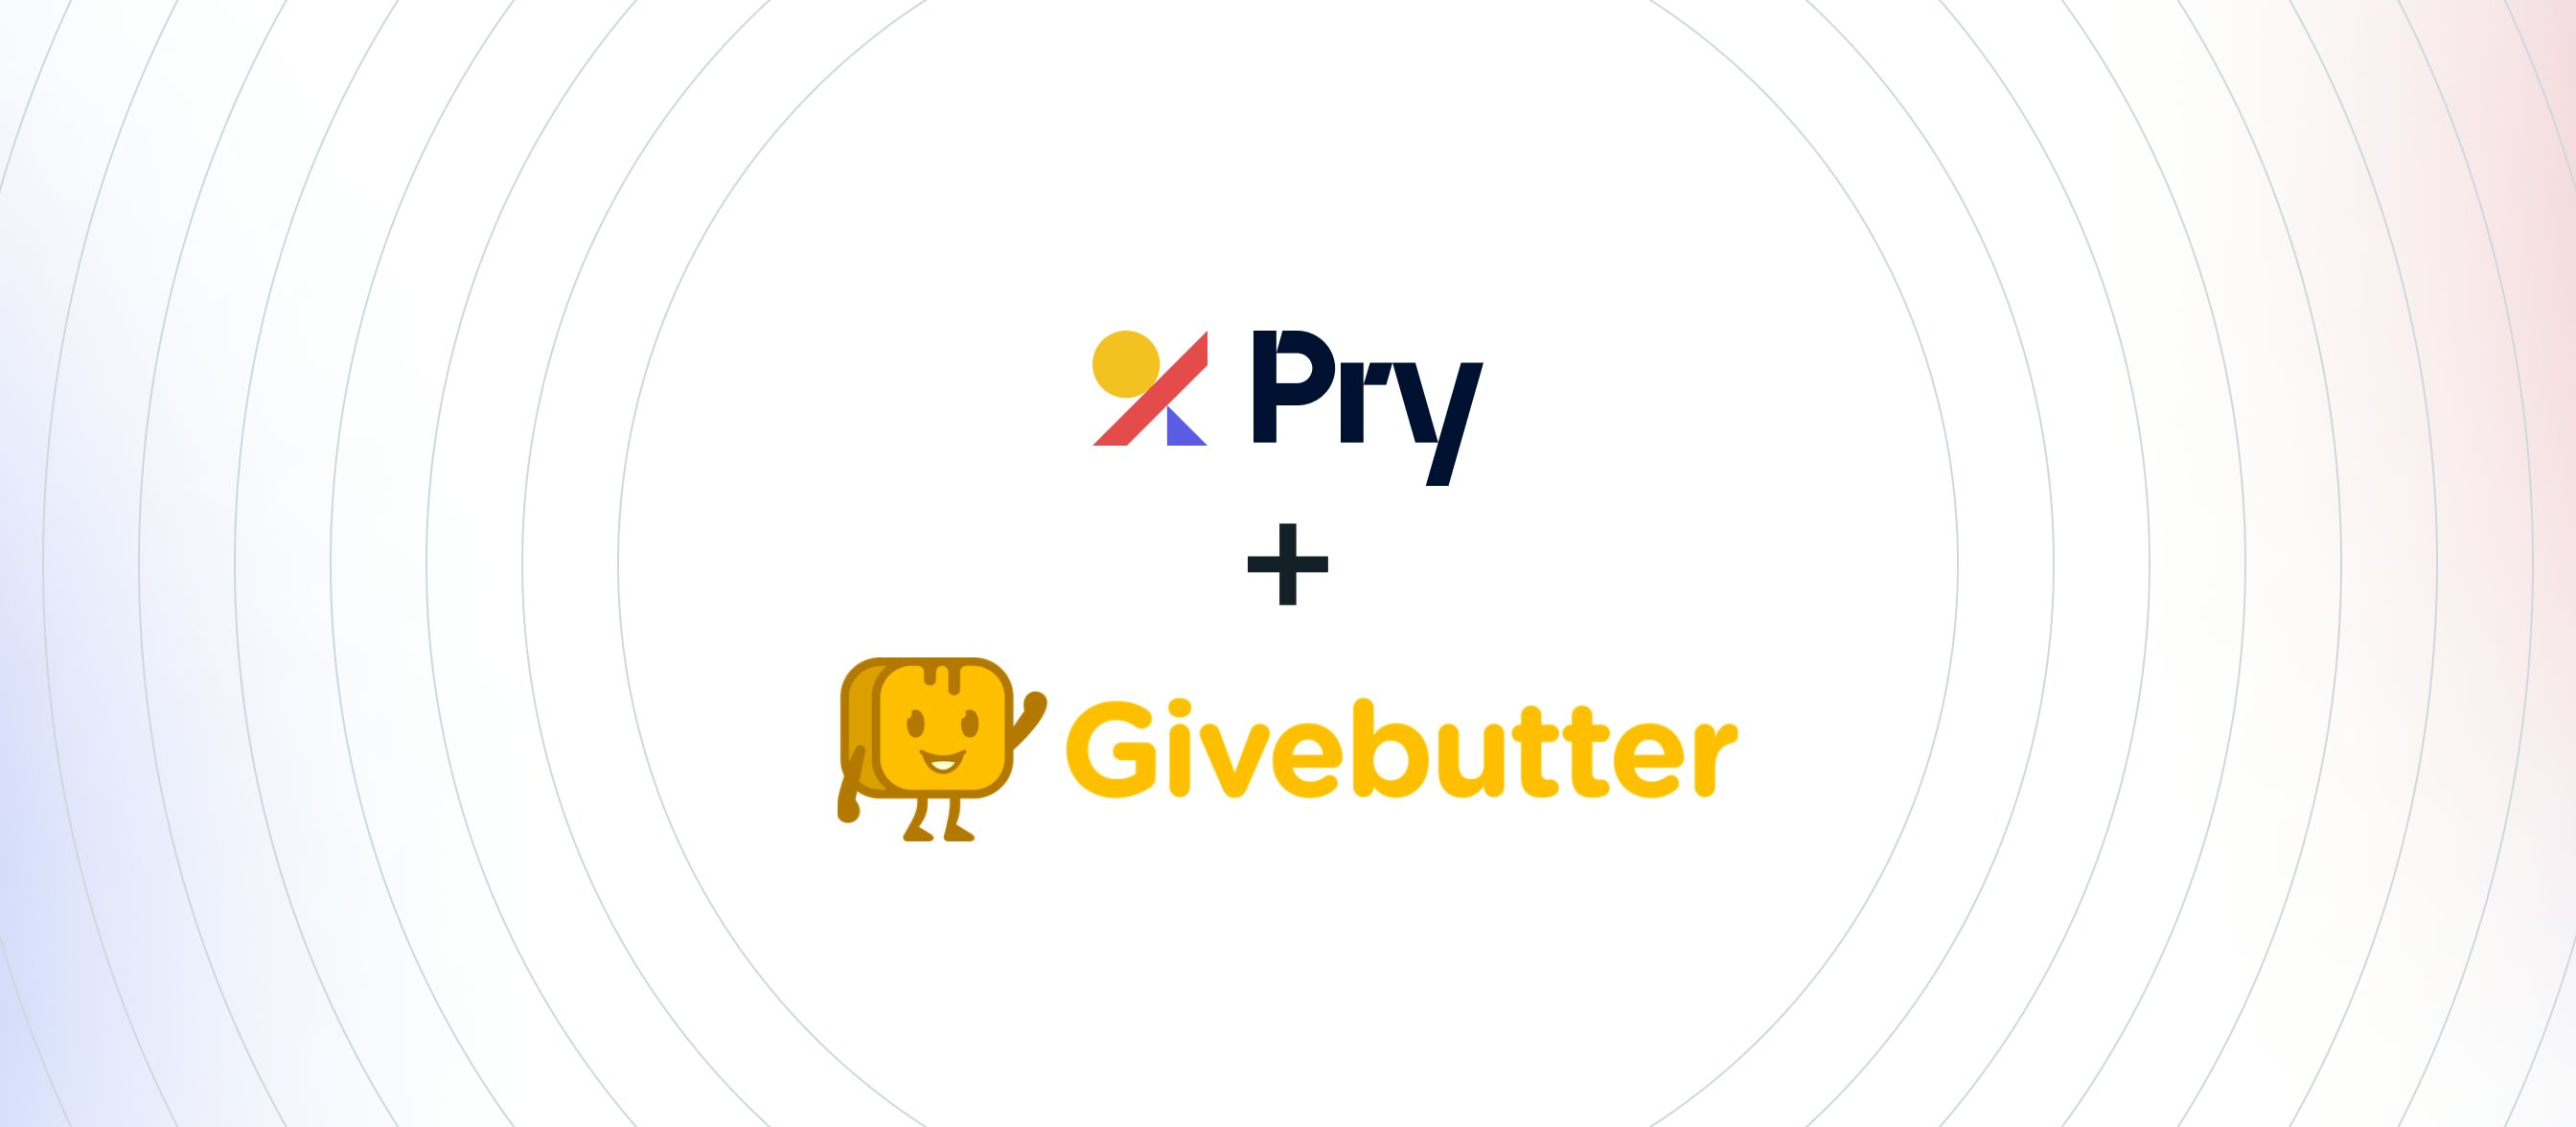 Givebutter + Pry